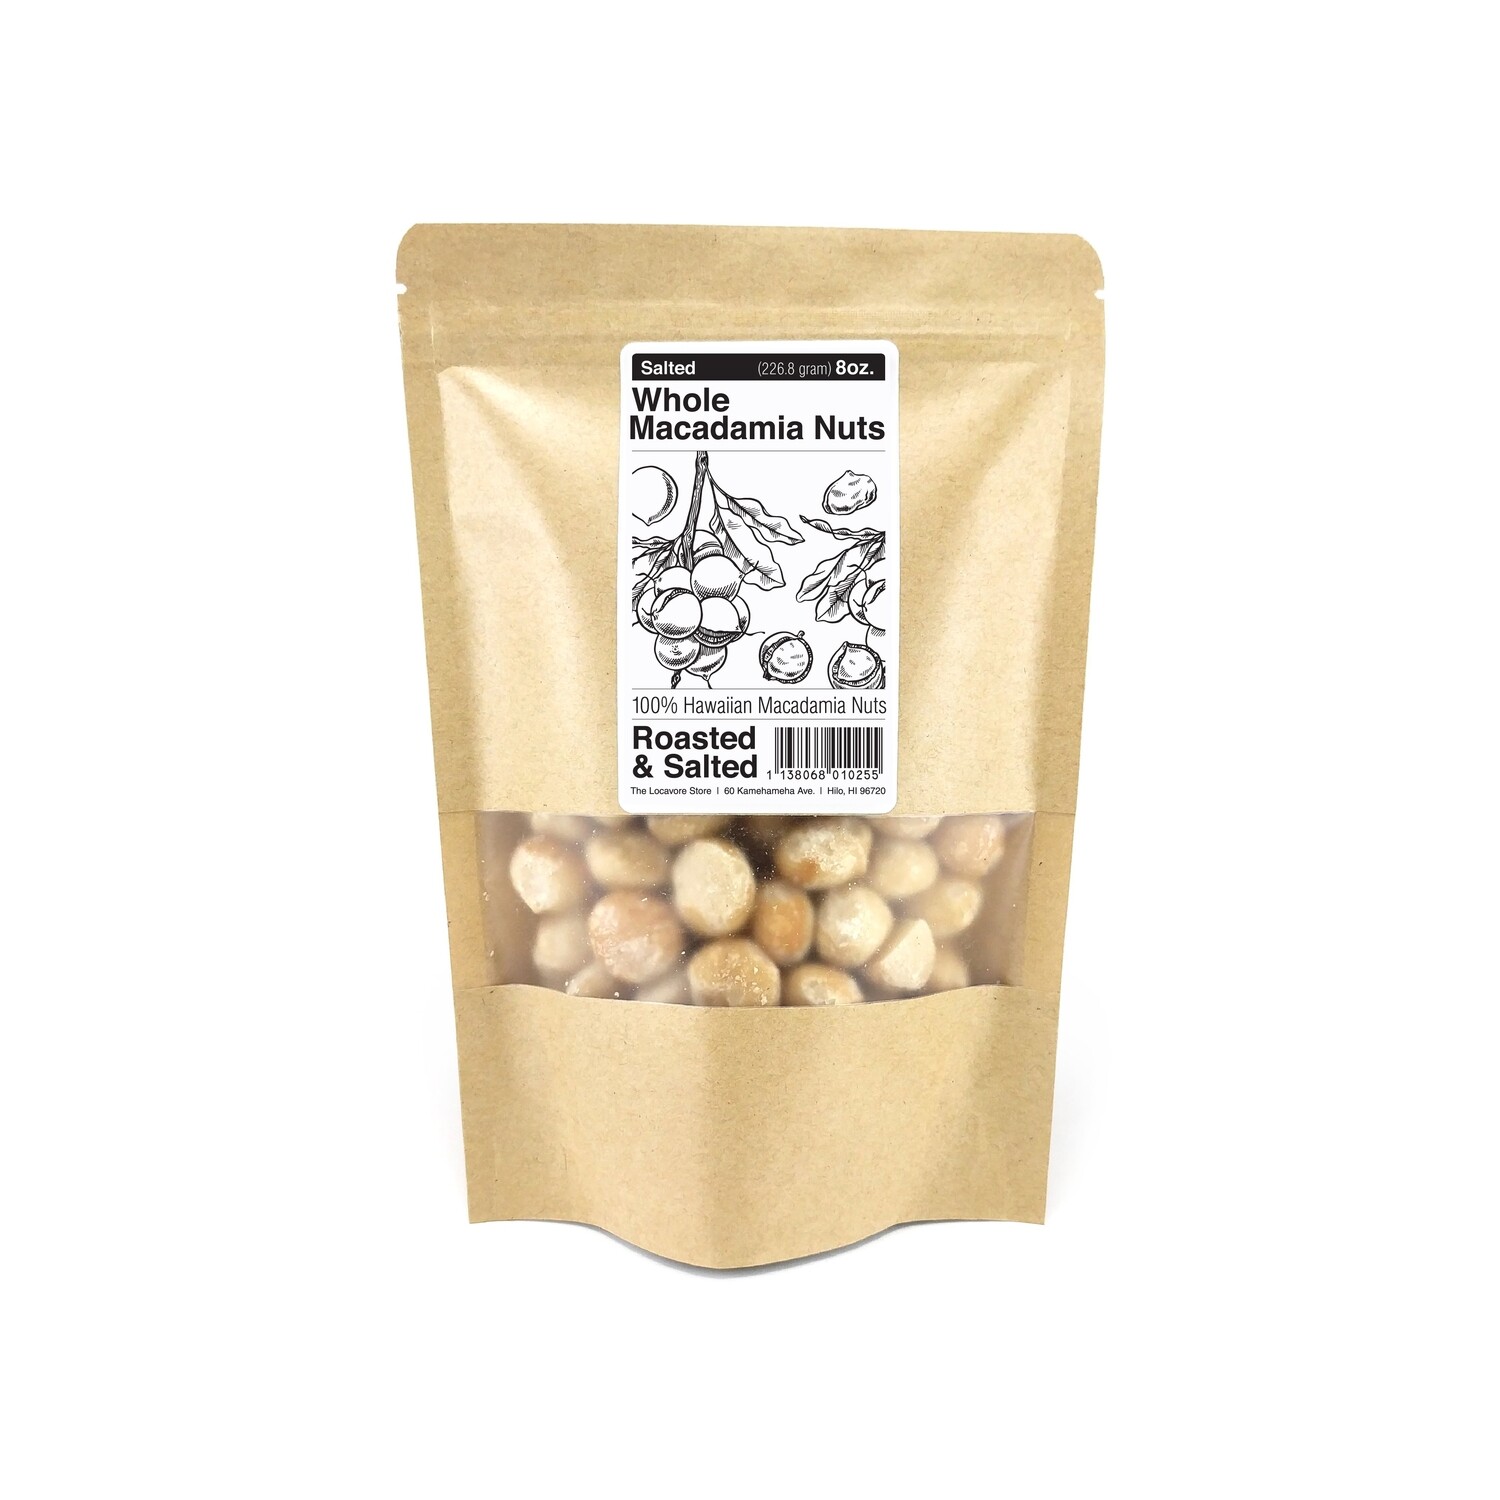 Macadamia Nuts, The Locavore Store - Salted (8 Oz.)